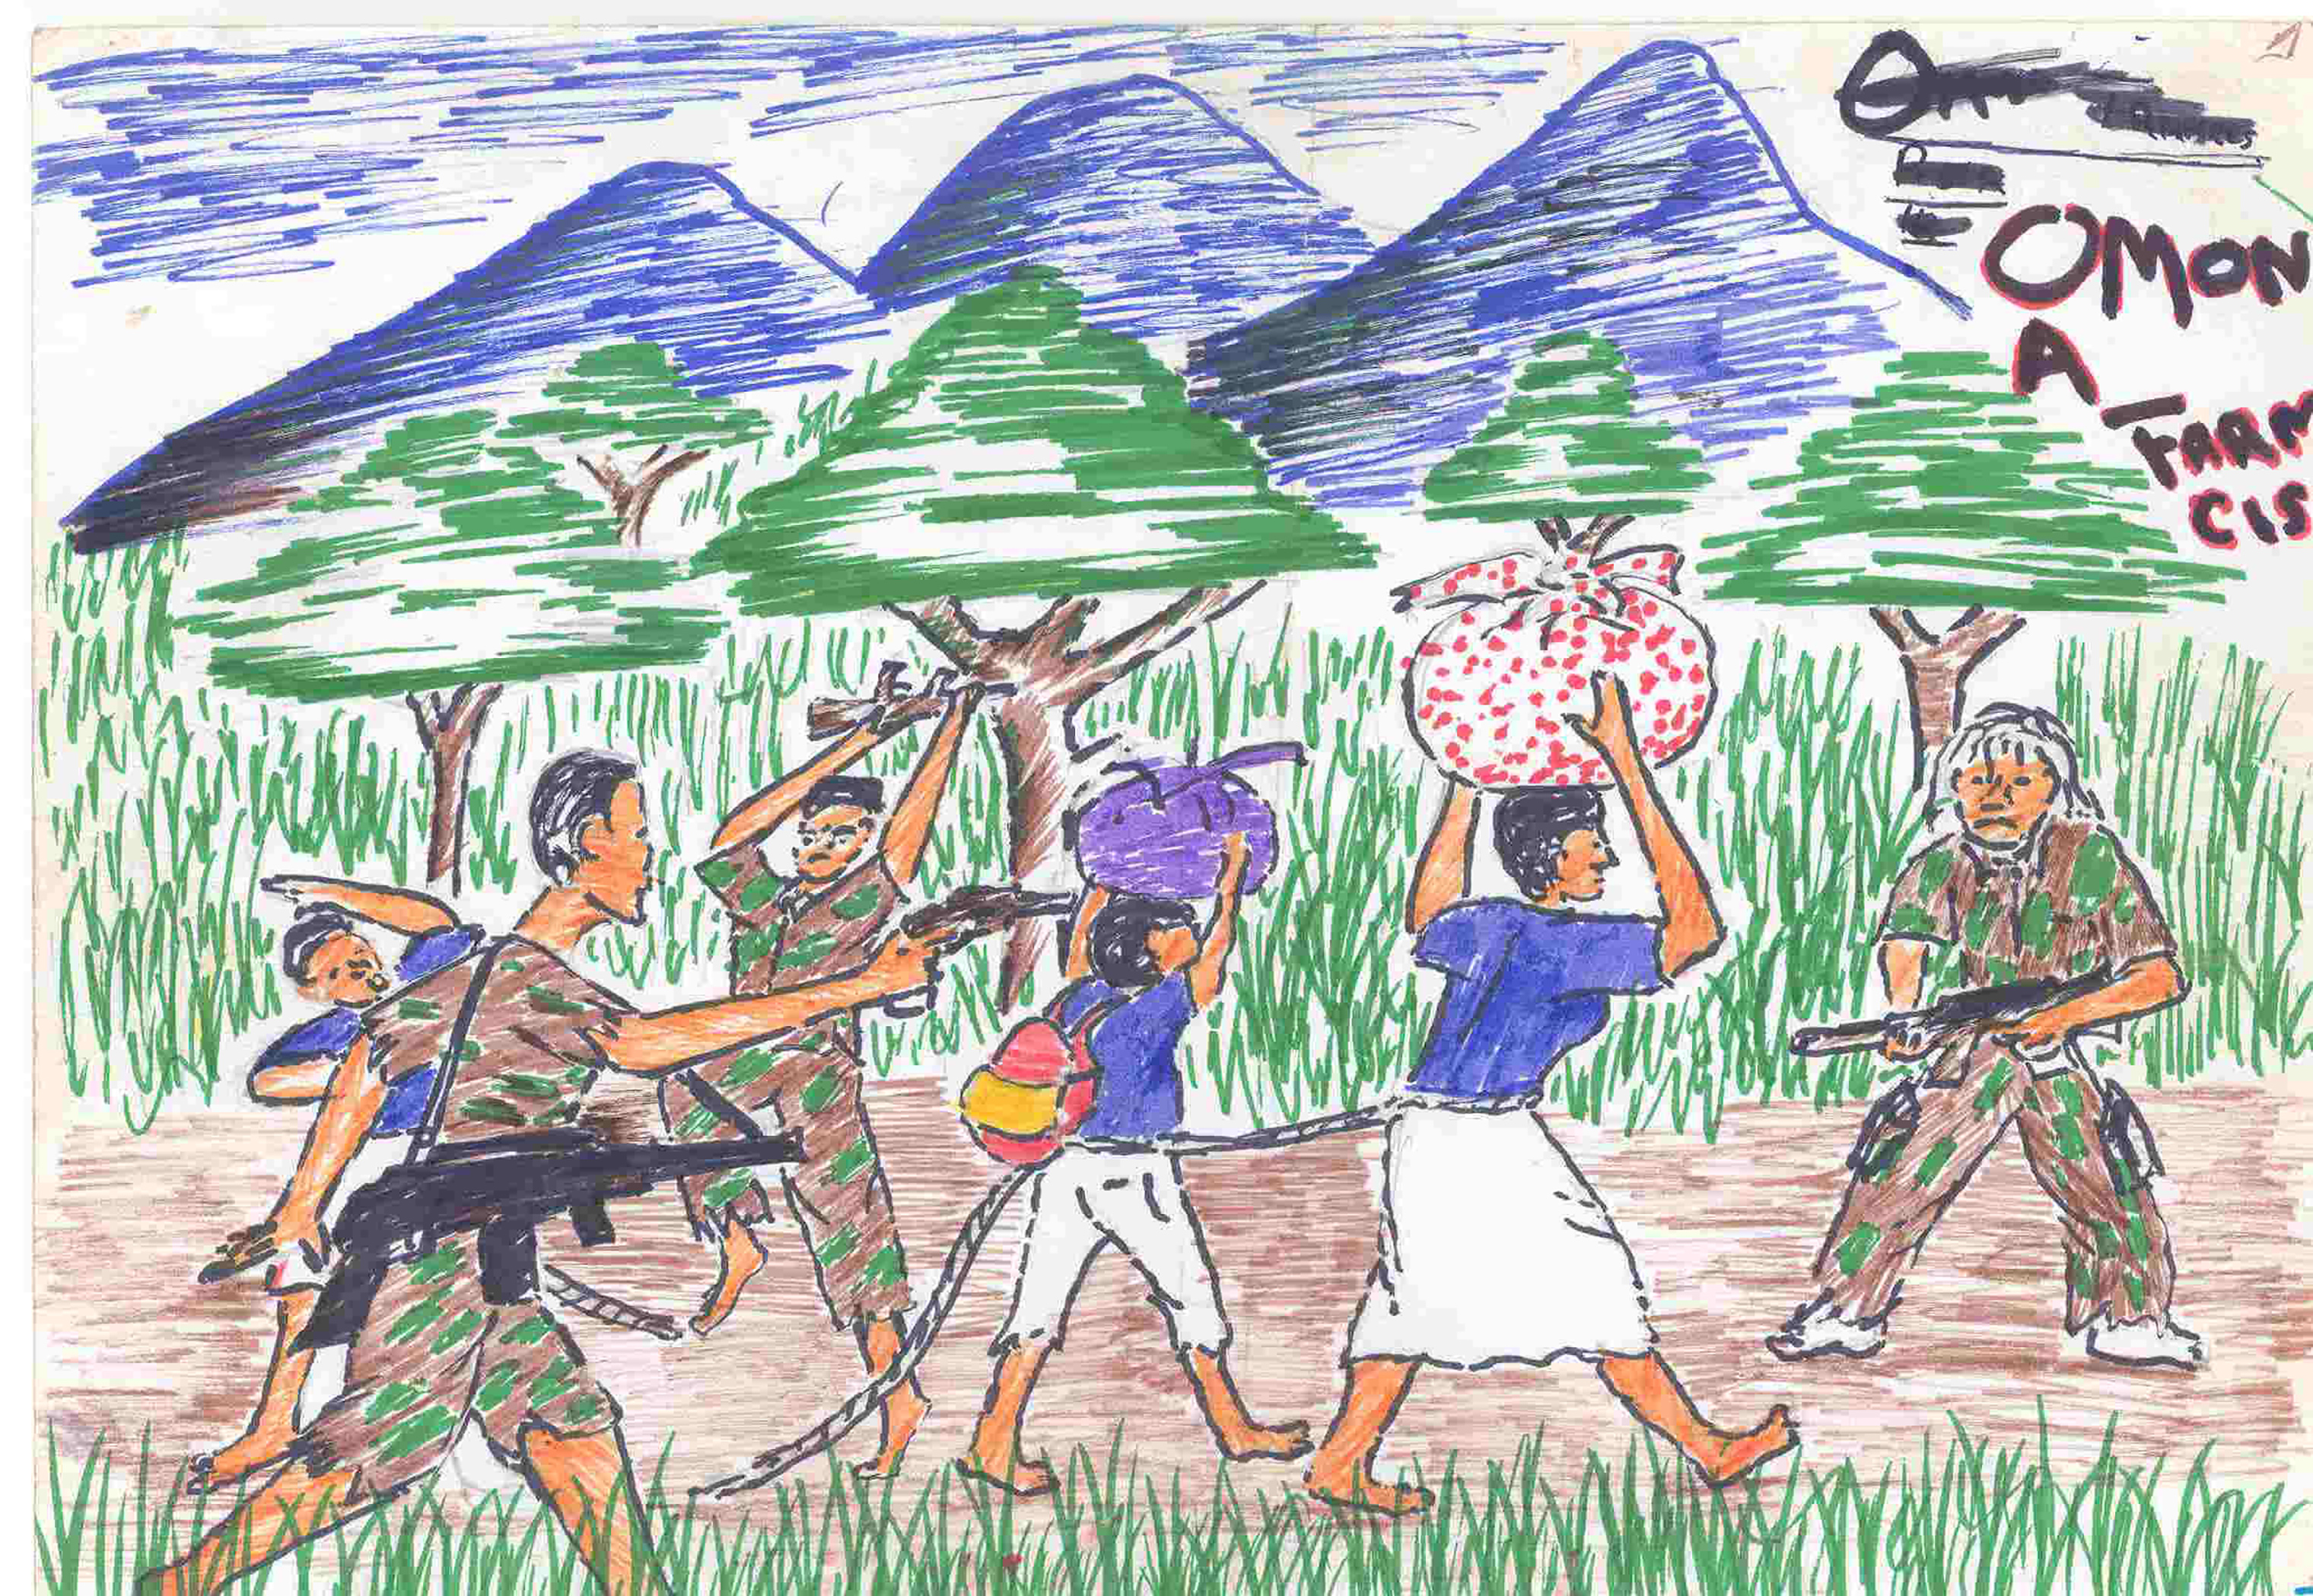 A drawing made by former child soldier in Uganda in 2002. In Uganda, the IRC worked with children during the height of the Lord's Resistance Army's reign of terror. (IRC)